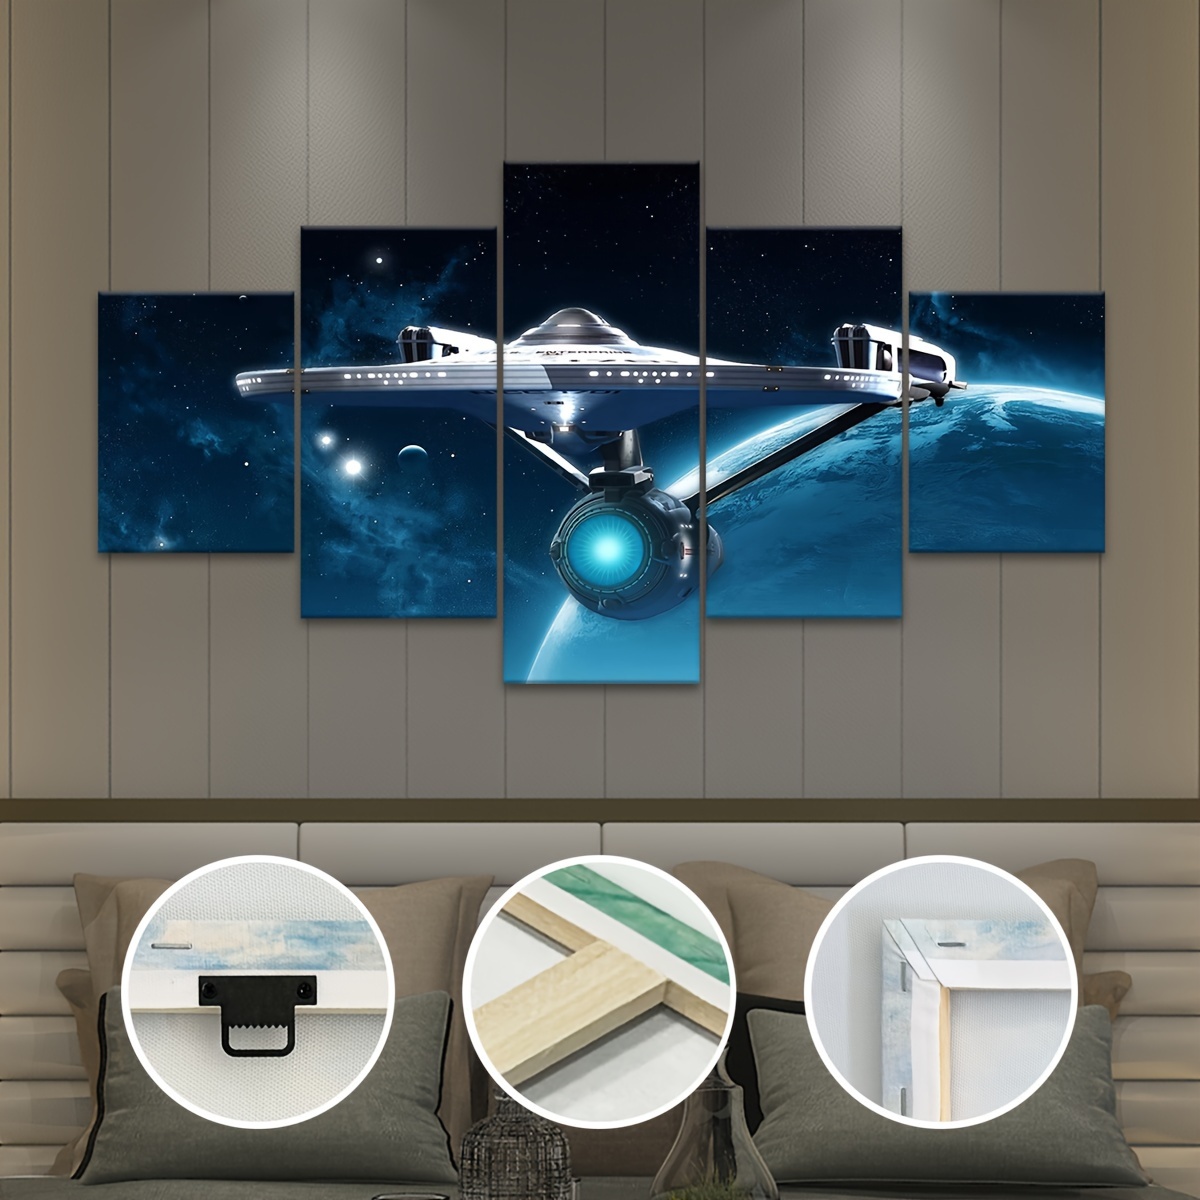 

5pcs/set Wooden Framed Canvas Poster, Modern Art, Universe Planetary Spacecraft Canvas Poster, Ideal Gift For Bedroom Living Room Corridor, Wall Art, Wall Decor, Winter Decor, Room Decoration